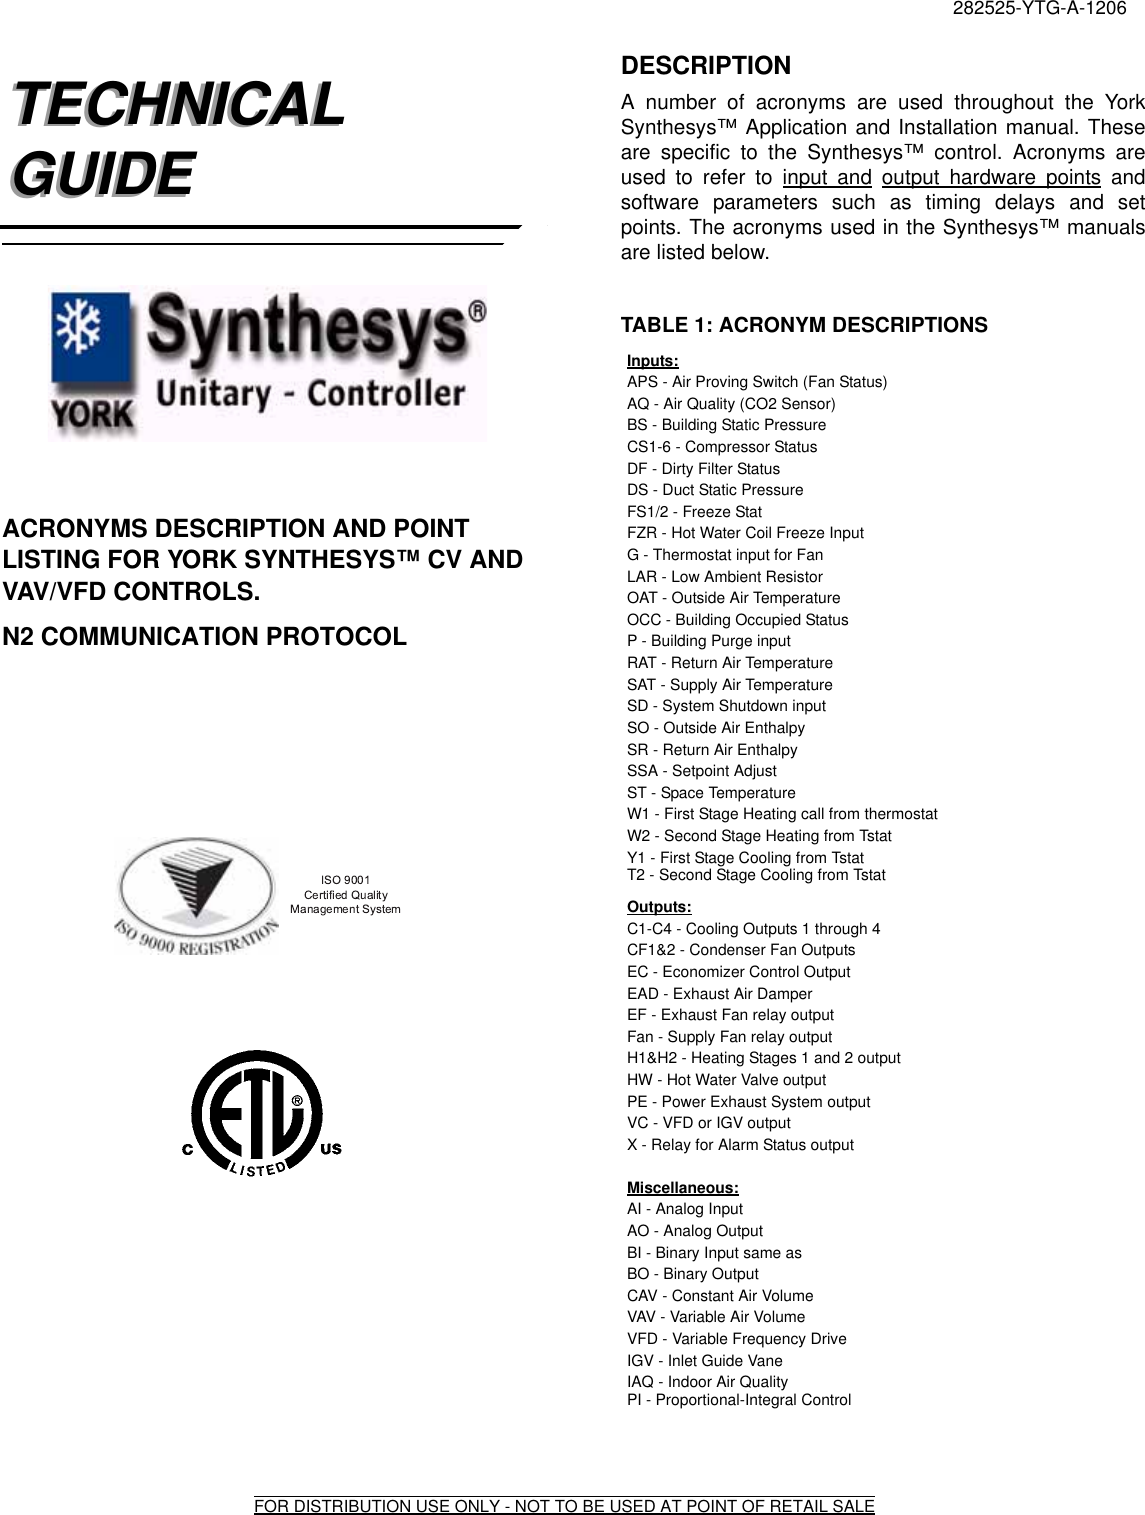 Page 1 of 8 - York Z-Millennium-R410A-Technical-Guide Y-TG-25-40 Ton Millennium, Synthesys Unitary Controller  York-z-millennium-r410a-technical-guide